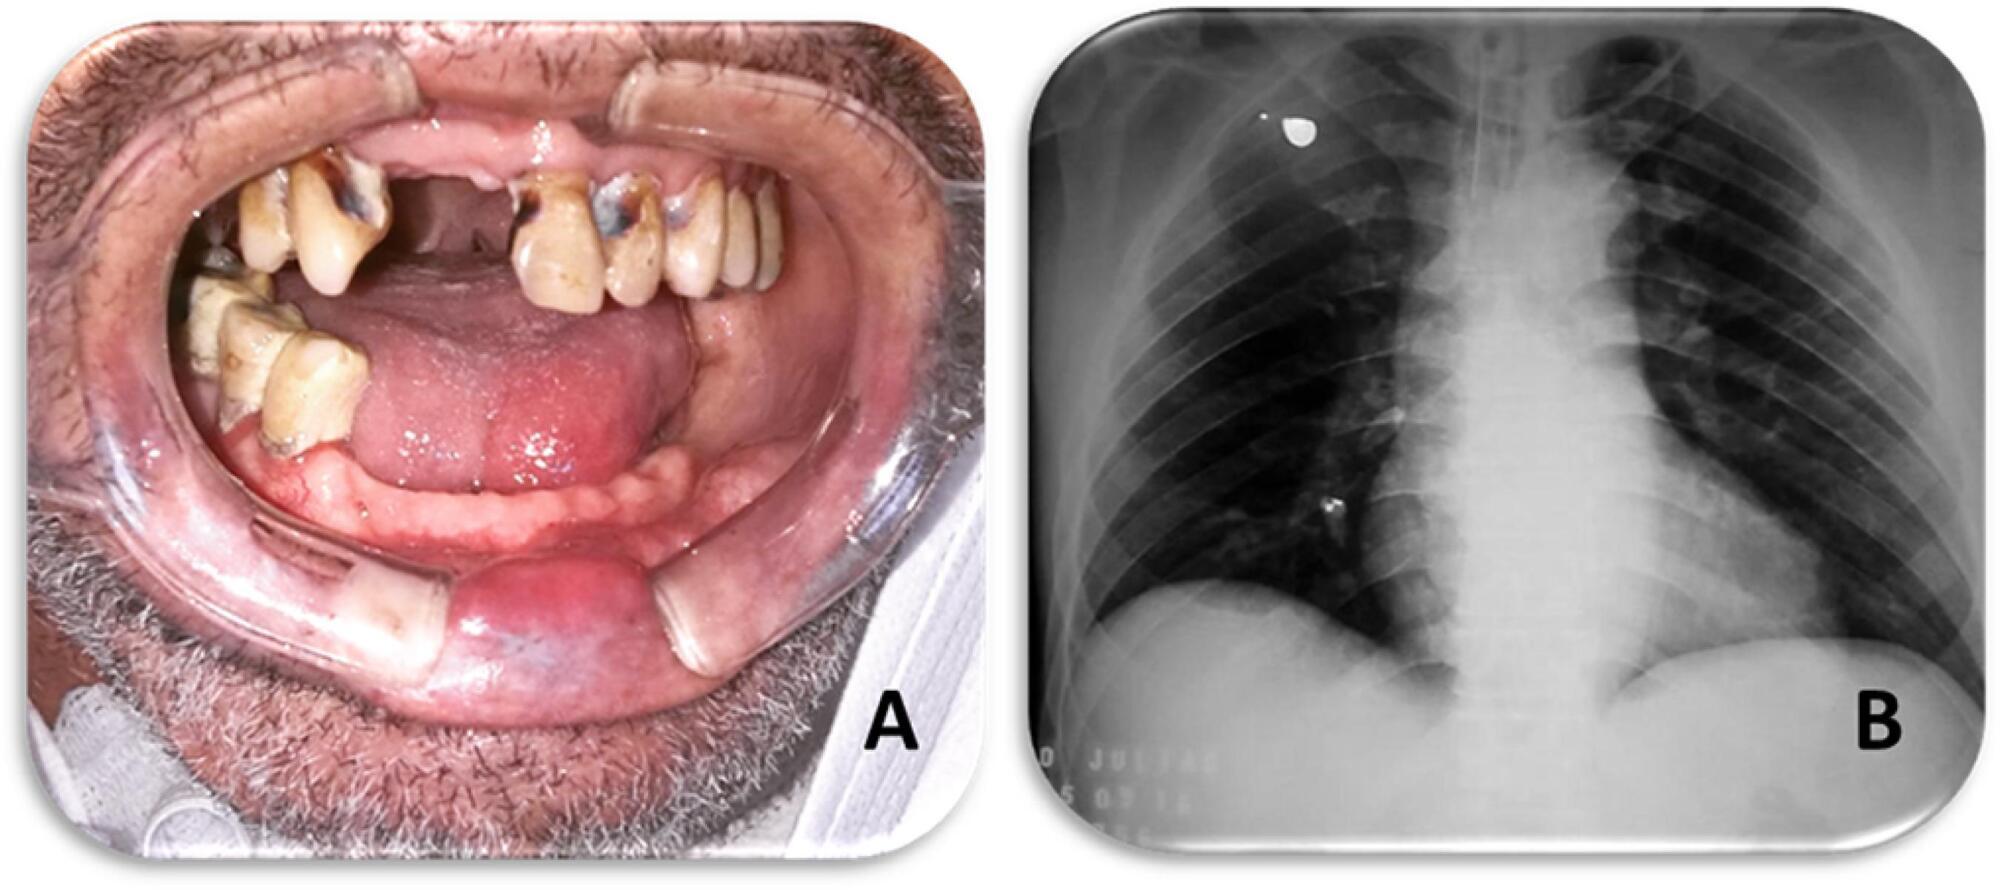 Periodontal disease and bronchoaspiration in a neurovegetative patient